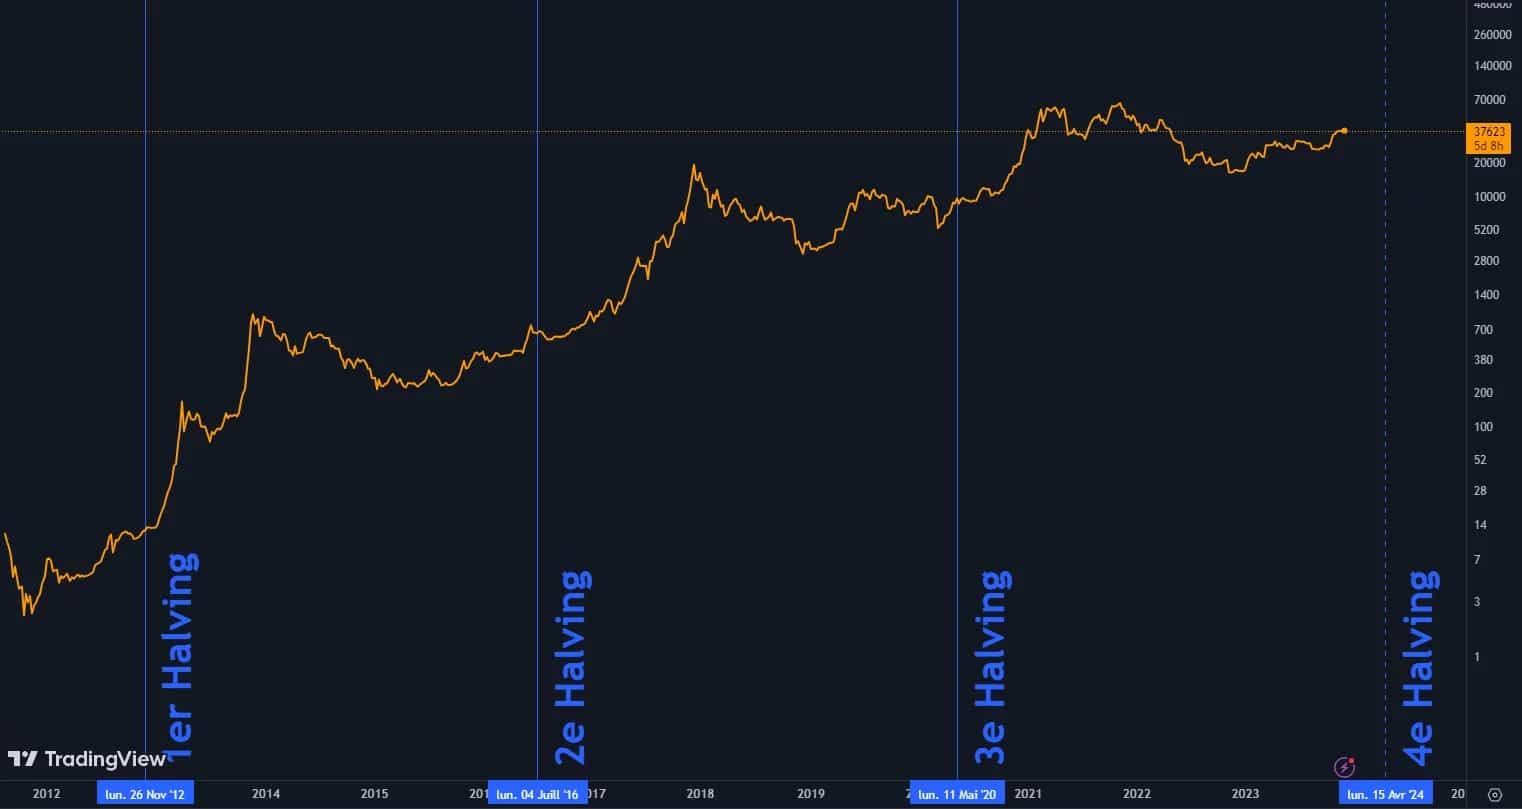 Bitcoin's price evolution and halvings